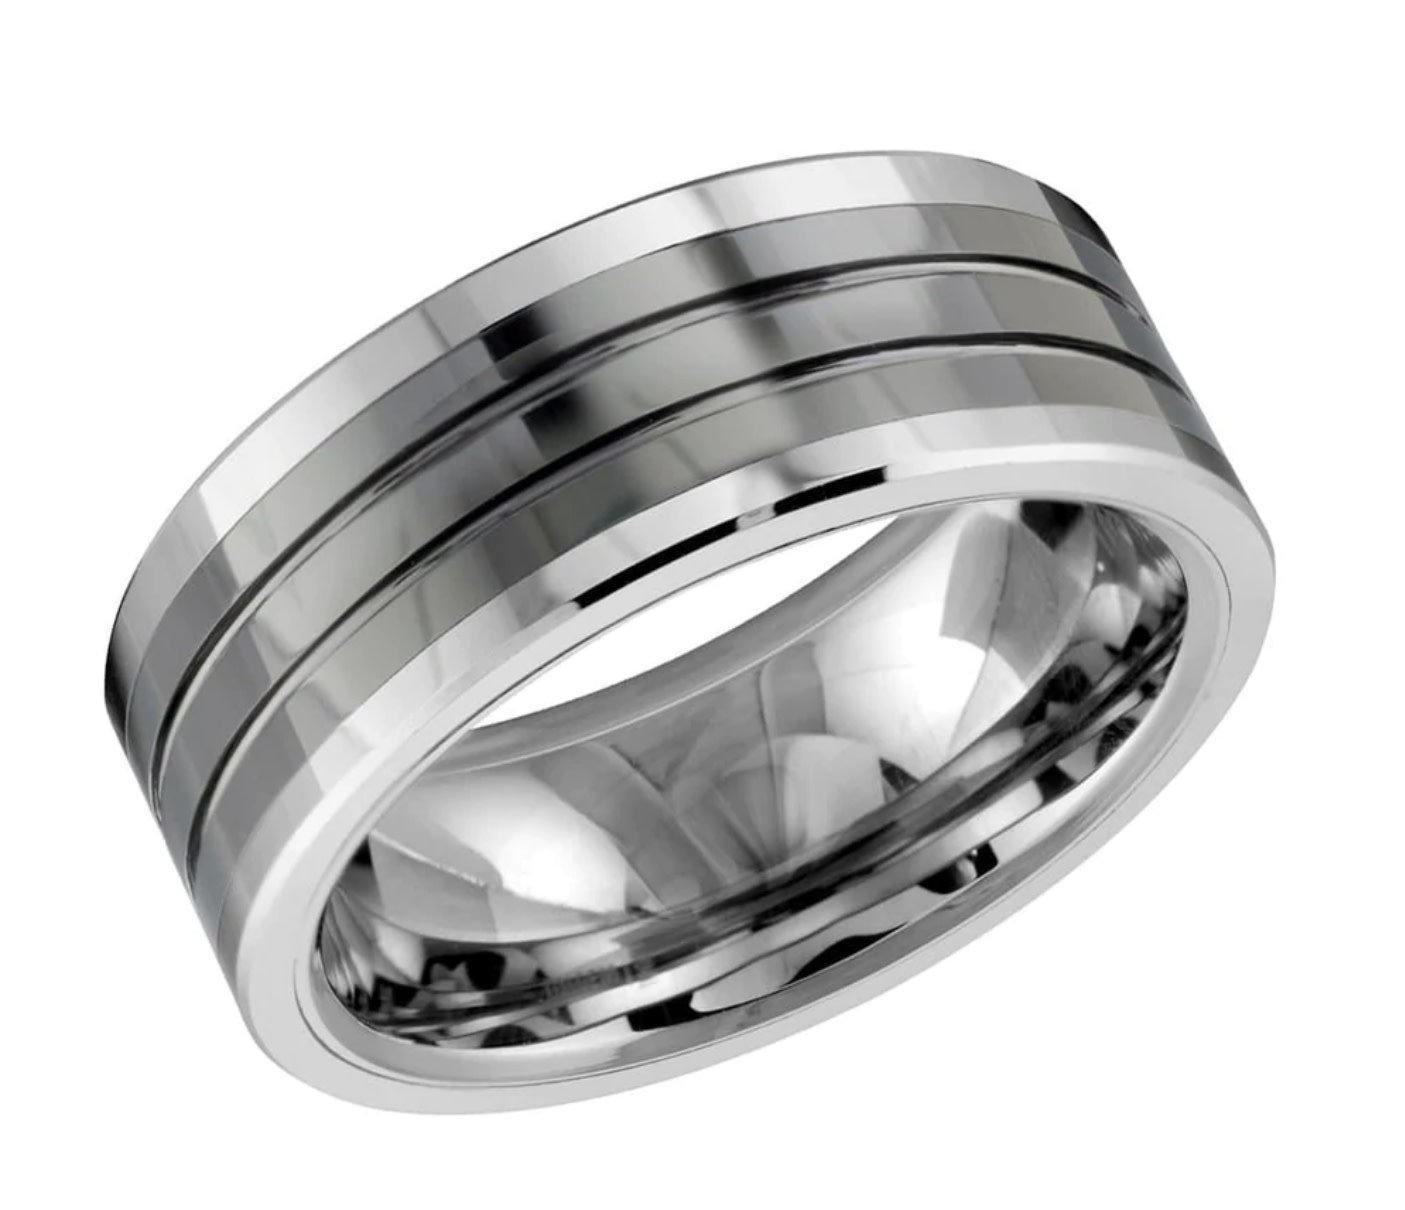 TC14 TUNGSTEN CARBIDE 8MM CERAMIC GROOVED BAND SIZE 10